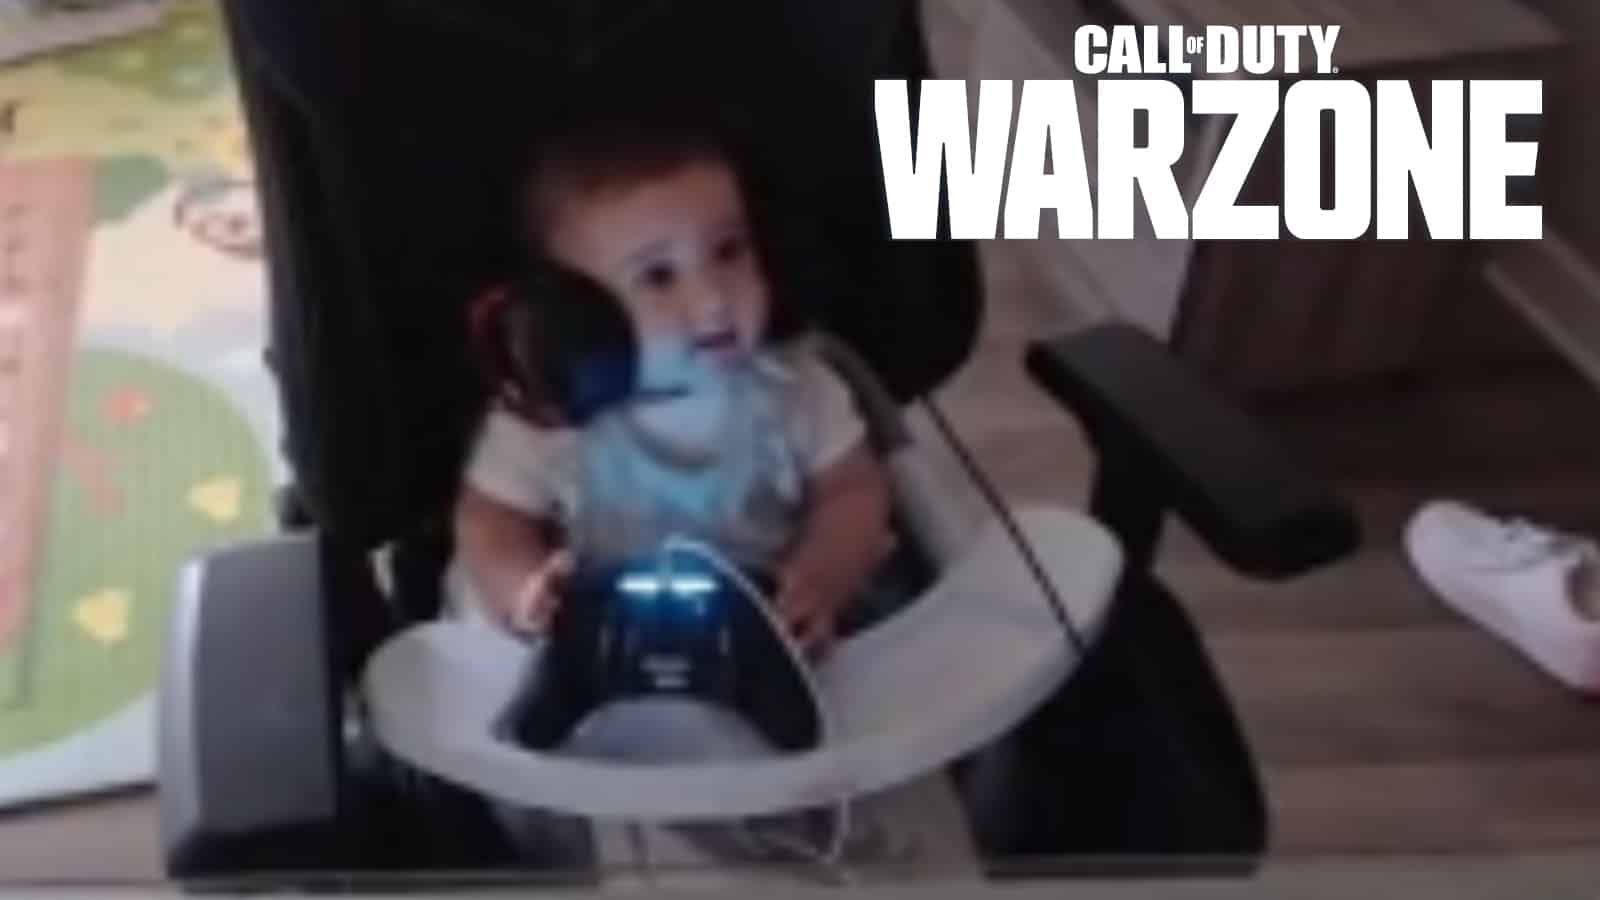 Baby plays Warzone